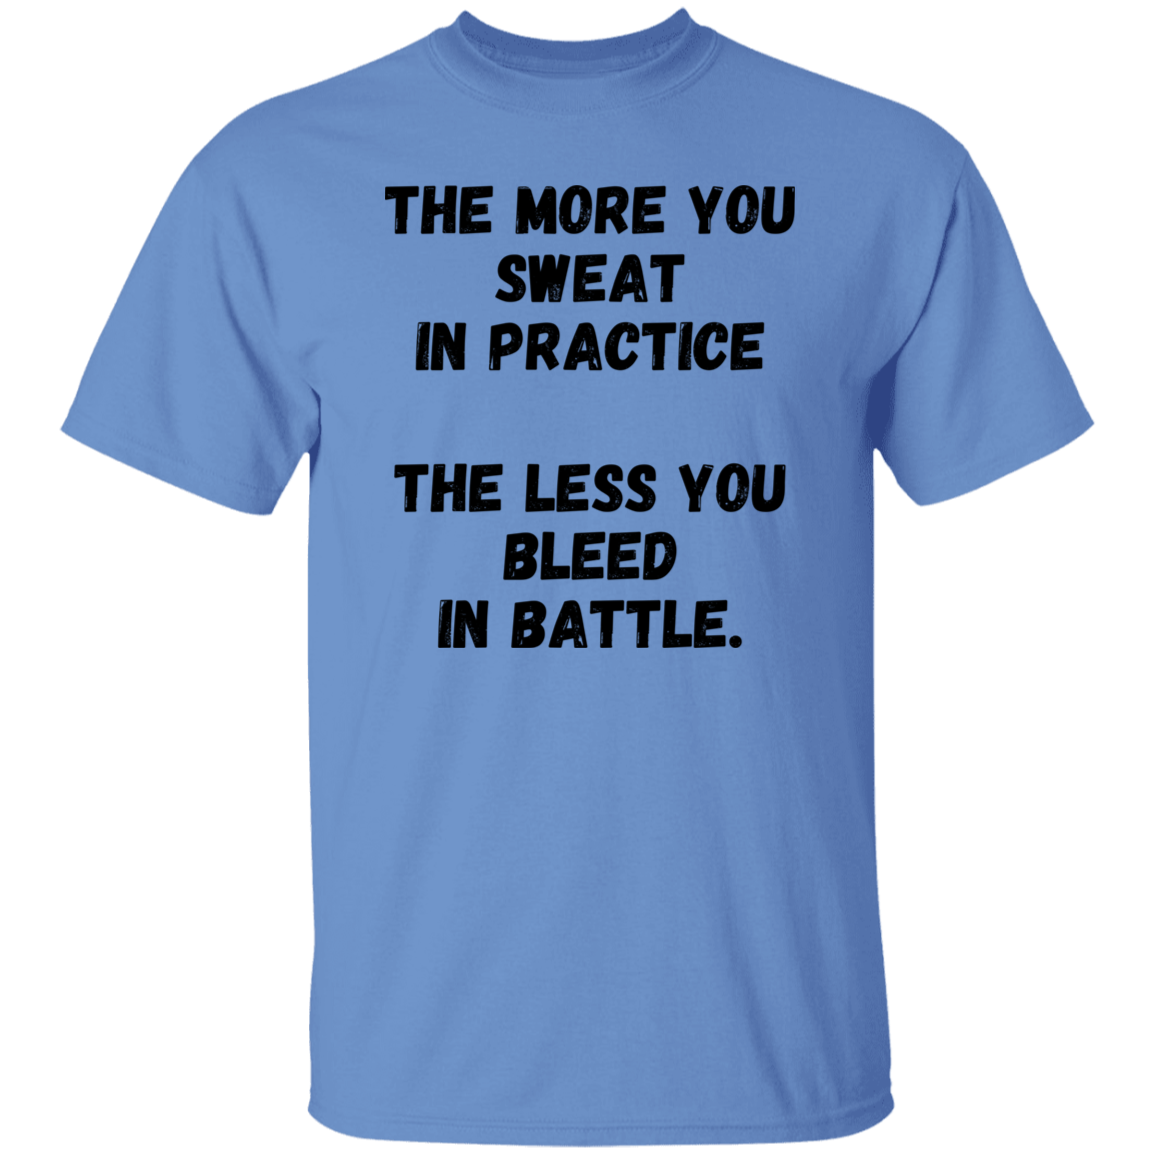 The More You Sweet in Practice, The Less You Bleed in Battle - Men's T-Shirt